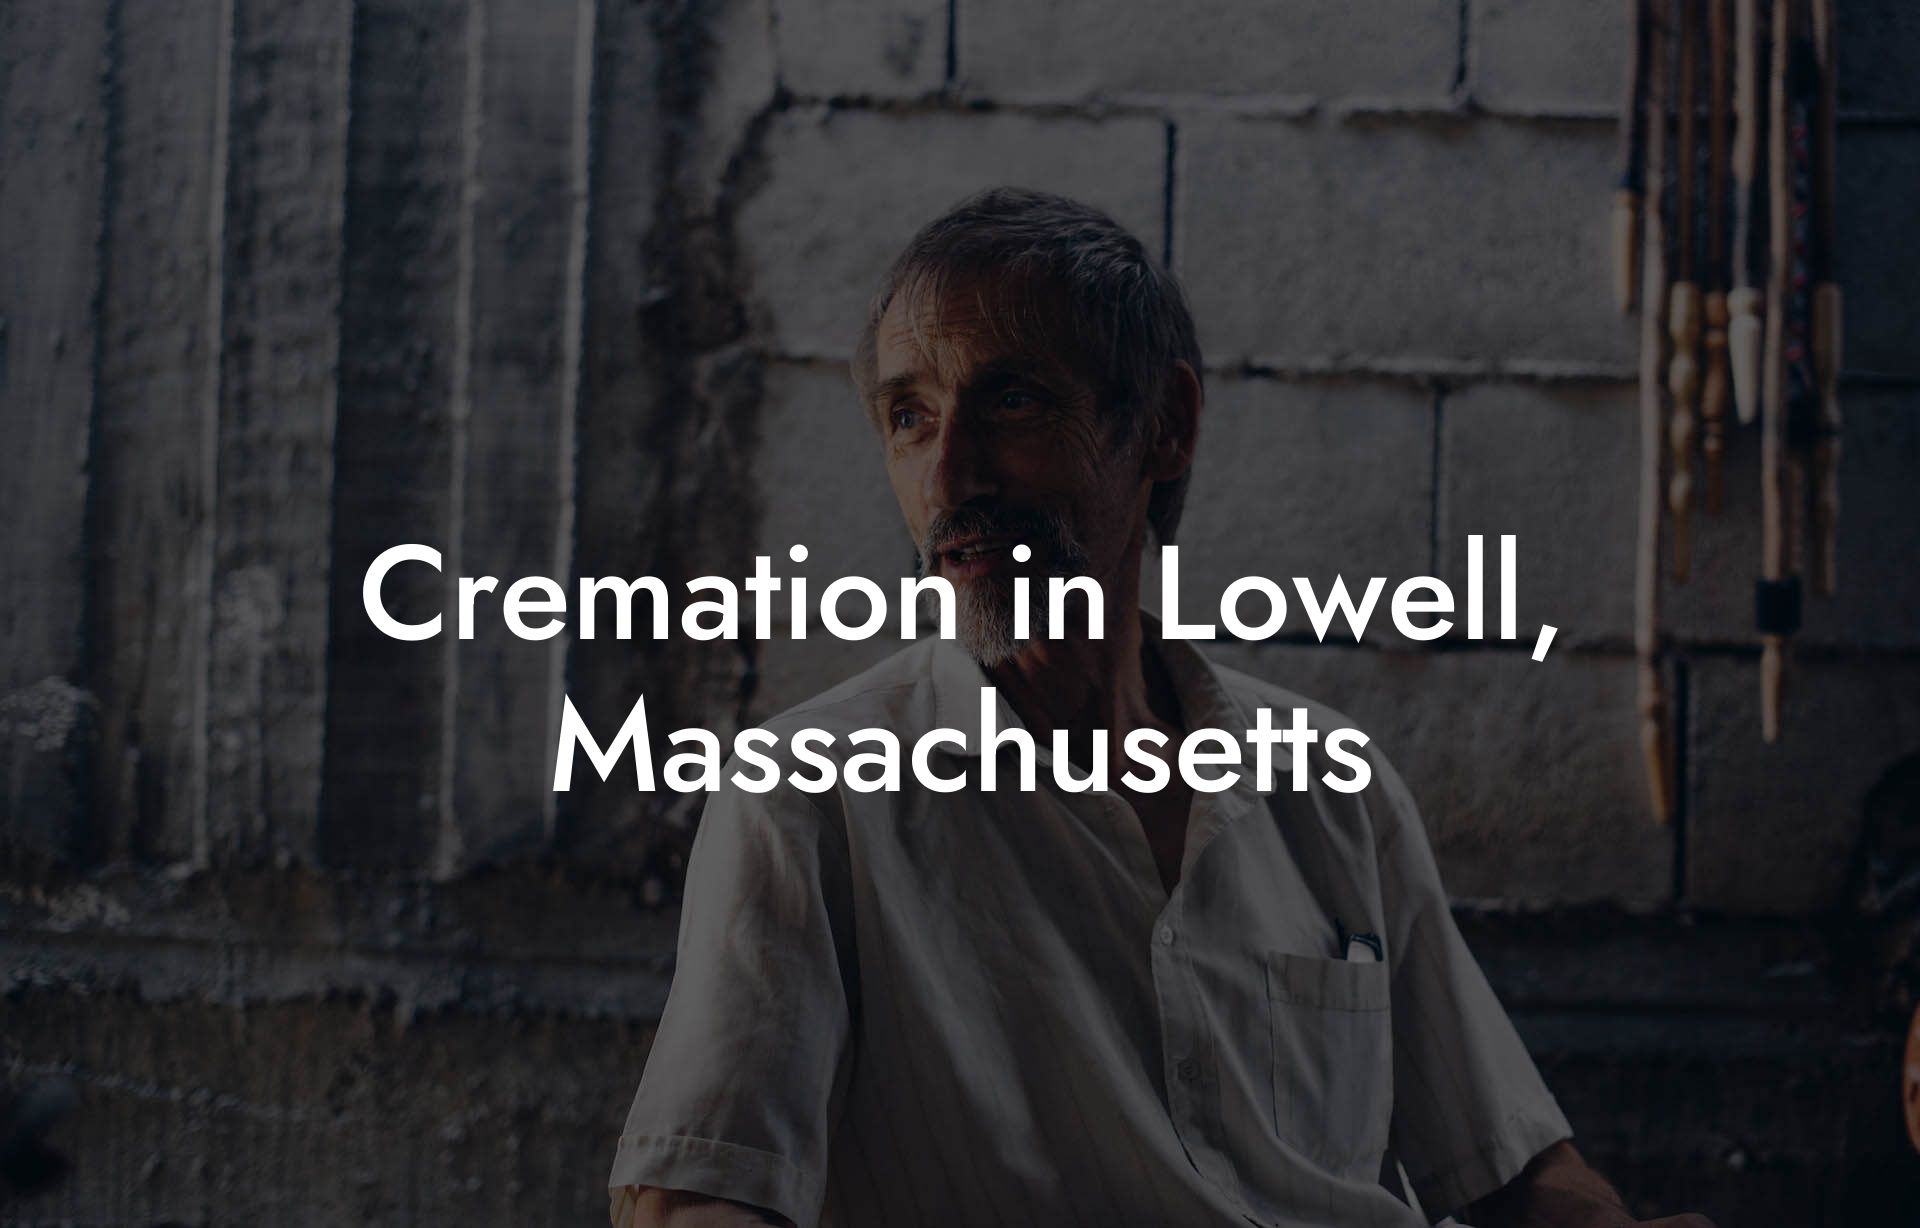 Cremation in Lowell, Massachusetts